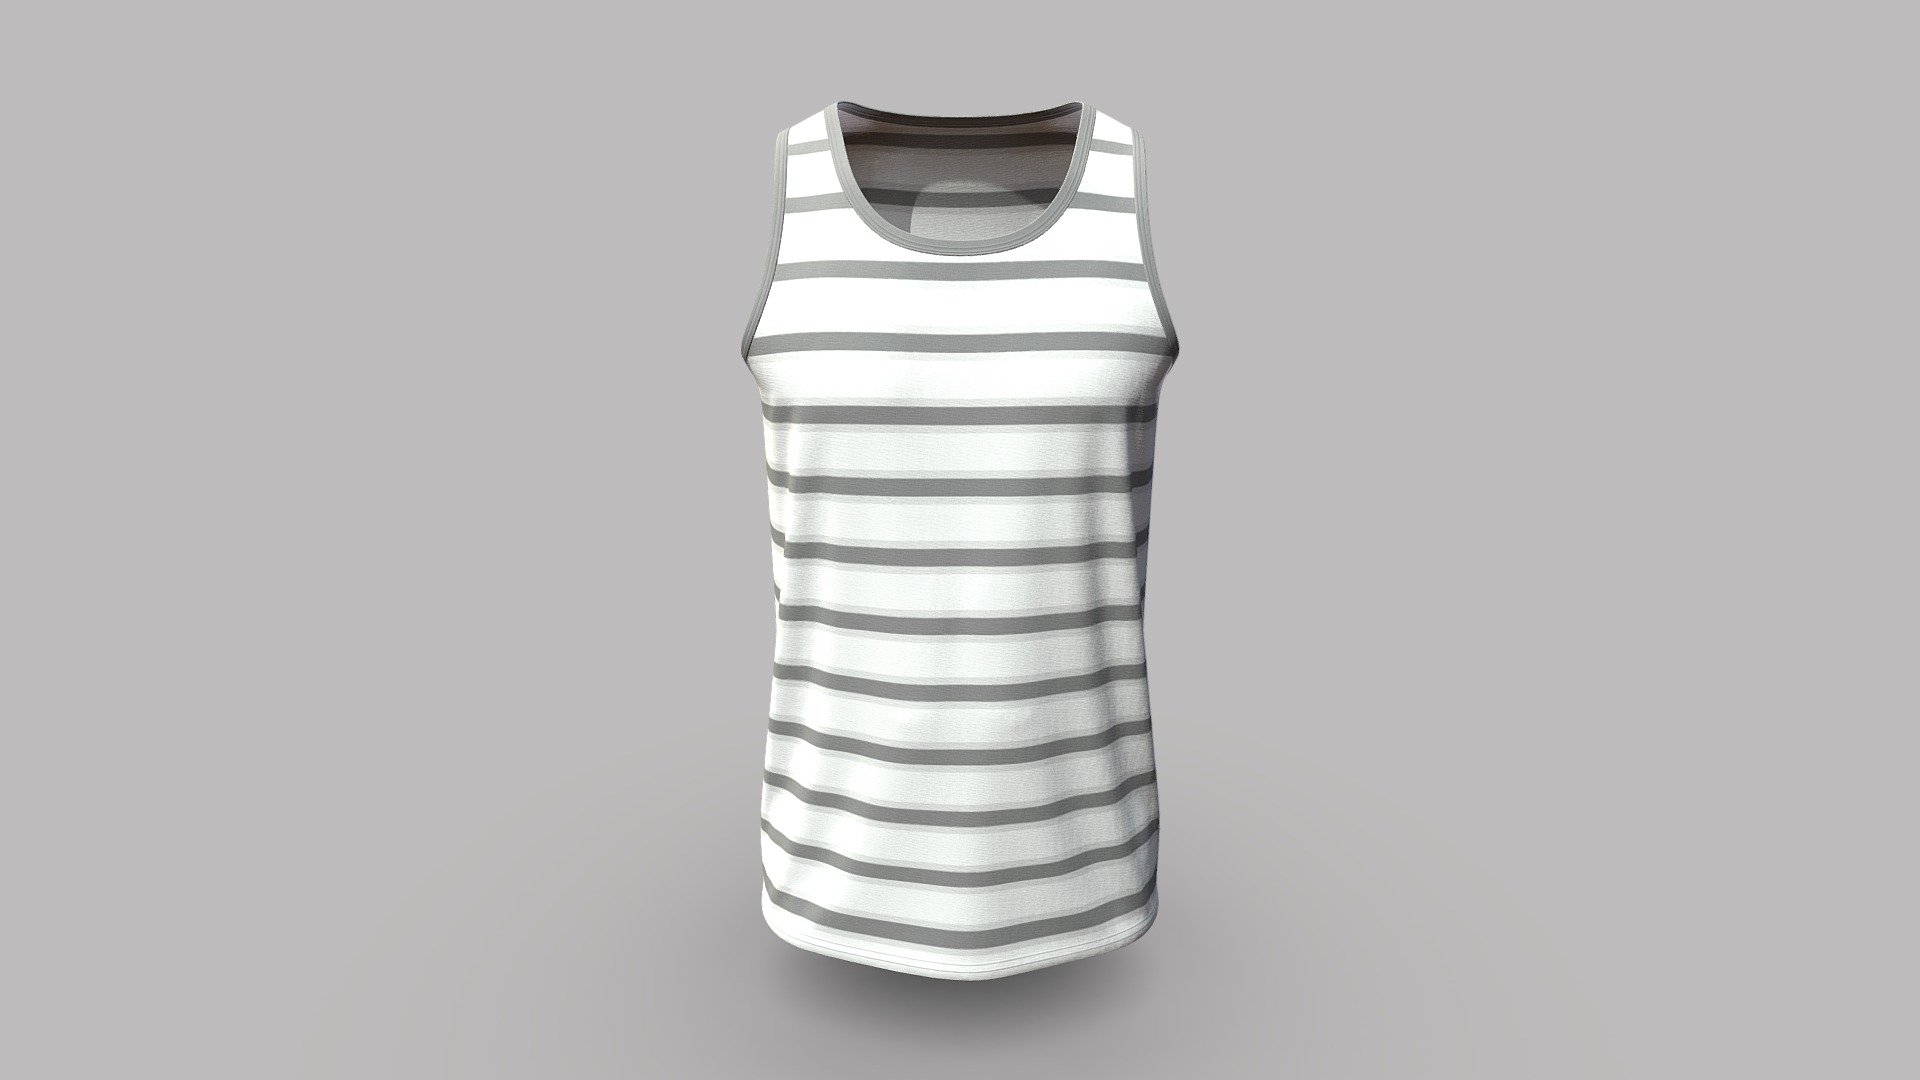 Cloth Title = Top Clothing Tanktop Design 

SKU = DG100211 

Category = Unisex 

Product Type = Tank Top 

Cloth Length = Regular 

Body Fit = Fitted  

Occasion = Sportswear  


Our Services:

3D Apparel Design.

OBJ,FBX,GLTF Making with High/Low Poly.

Fabric Digitalization.

Mockup making.

3D Teck Pack.

Pattern Making.

2D Illustration.

Cloth Animation and 360 Spin Video.


Contact us:- 

Email: info@digitalfashionwear.com 

Website: https://digitalfashionwear.com 


We designed all the types of cloth specially focused on product visualization, e-commerce, fitting, and production. 

We will design: 

T-shirts 

Polo shirts 

Hoodies 

Sweatshirt 

Jackets 

Shirts 

TankTops 

Trousers 

Bras 

Underwear 

Blazer 

Aprons 

Leggings 

and All Fashion items. 





Our goal is to make sure what we provide you, meets your demand 3d model